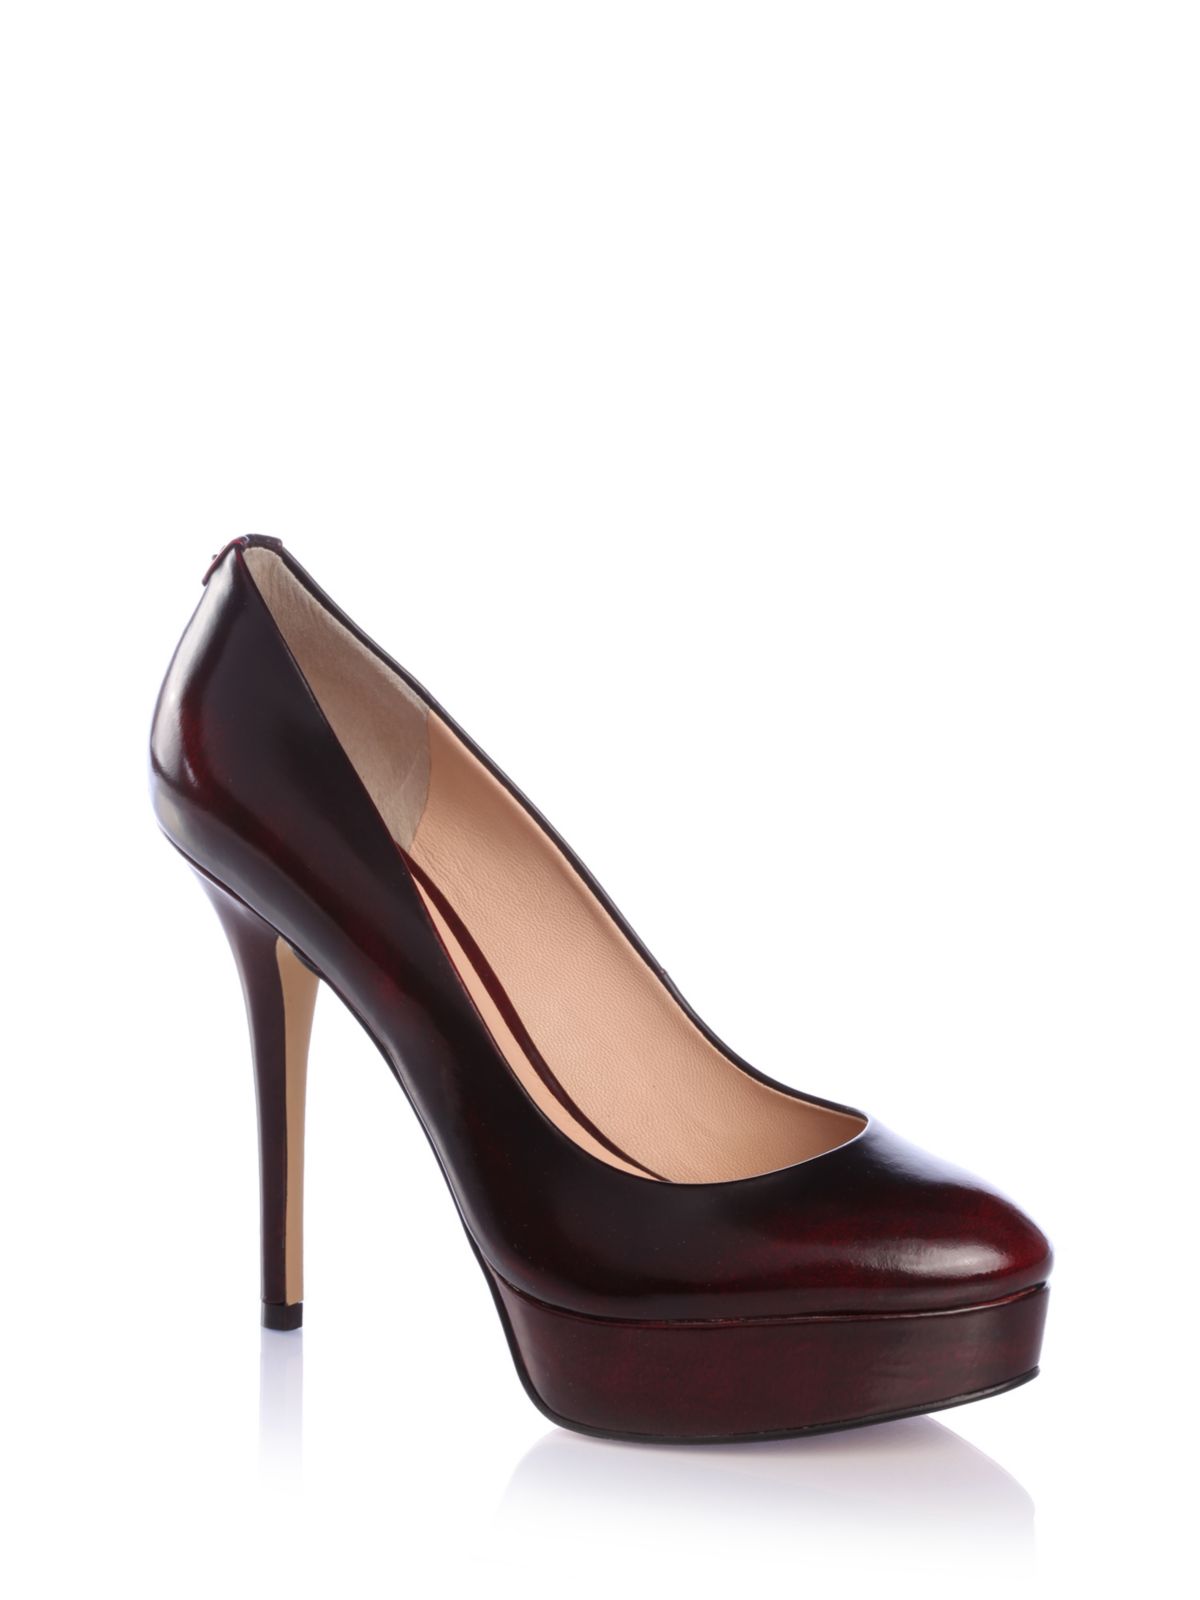 Guess Elsea Antik Leather Court Shoe in Red (Burgundy) | Lyst